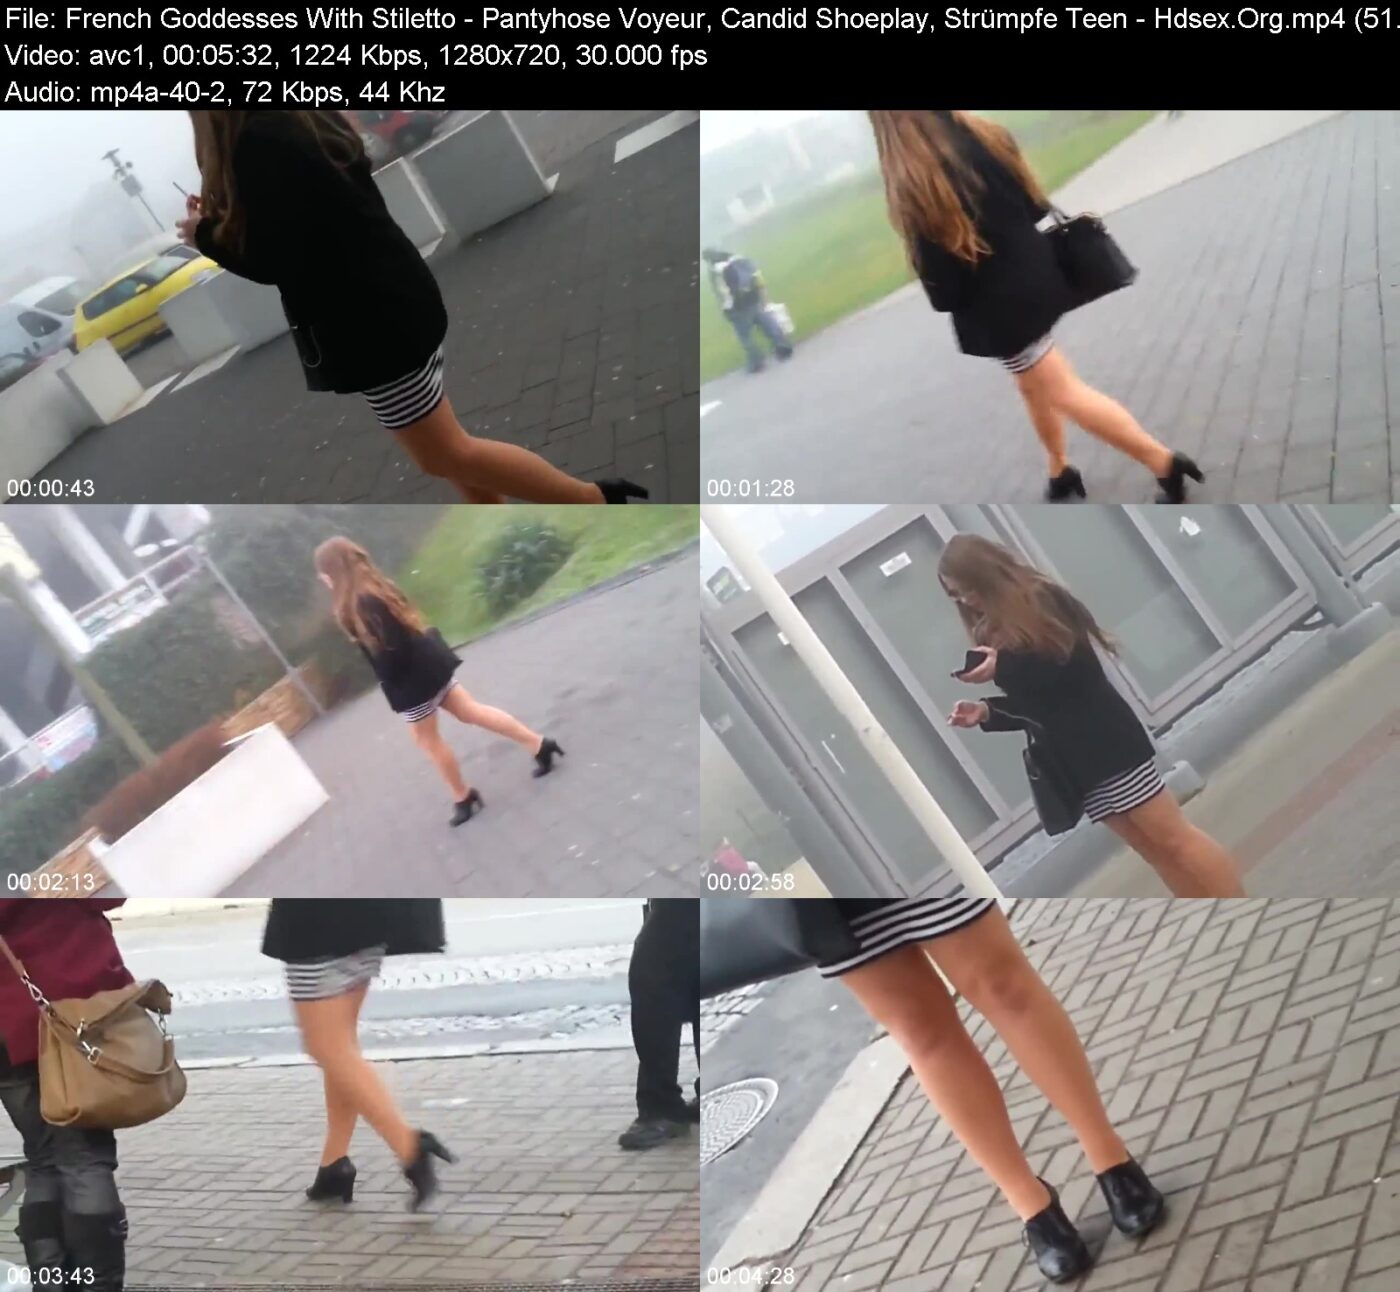 French Goddesses With Stiletto in Pantyhose Voyeur, Candid Shoeplay, Strümpfe Teen in Hdsex.Org